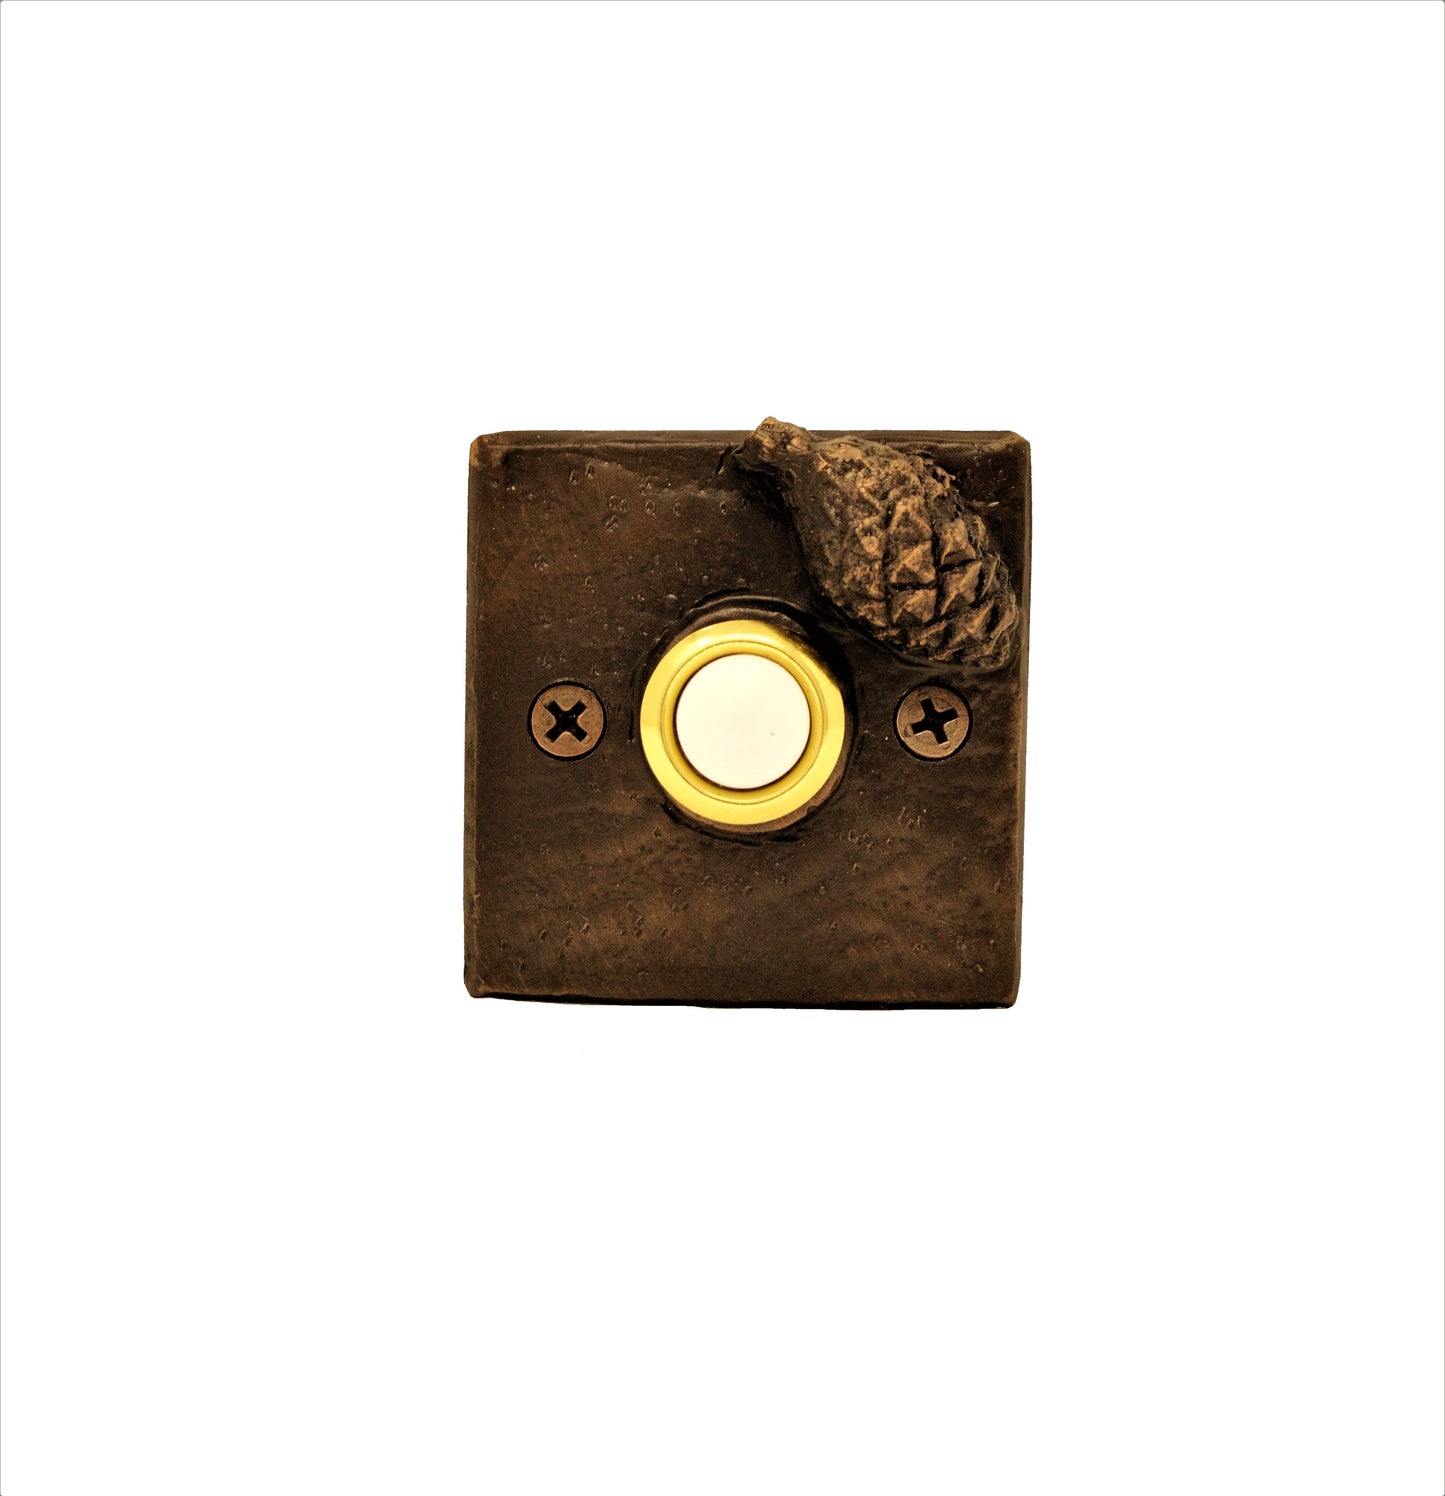 Square Lodgepole Pine Cone Doorbell made from bronze